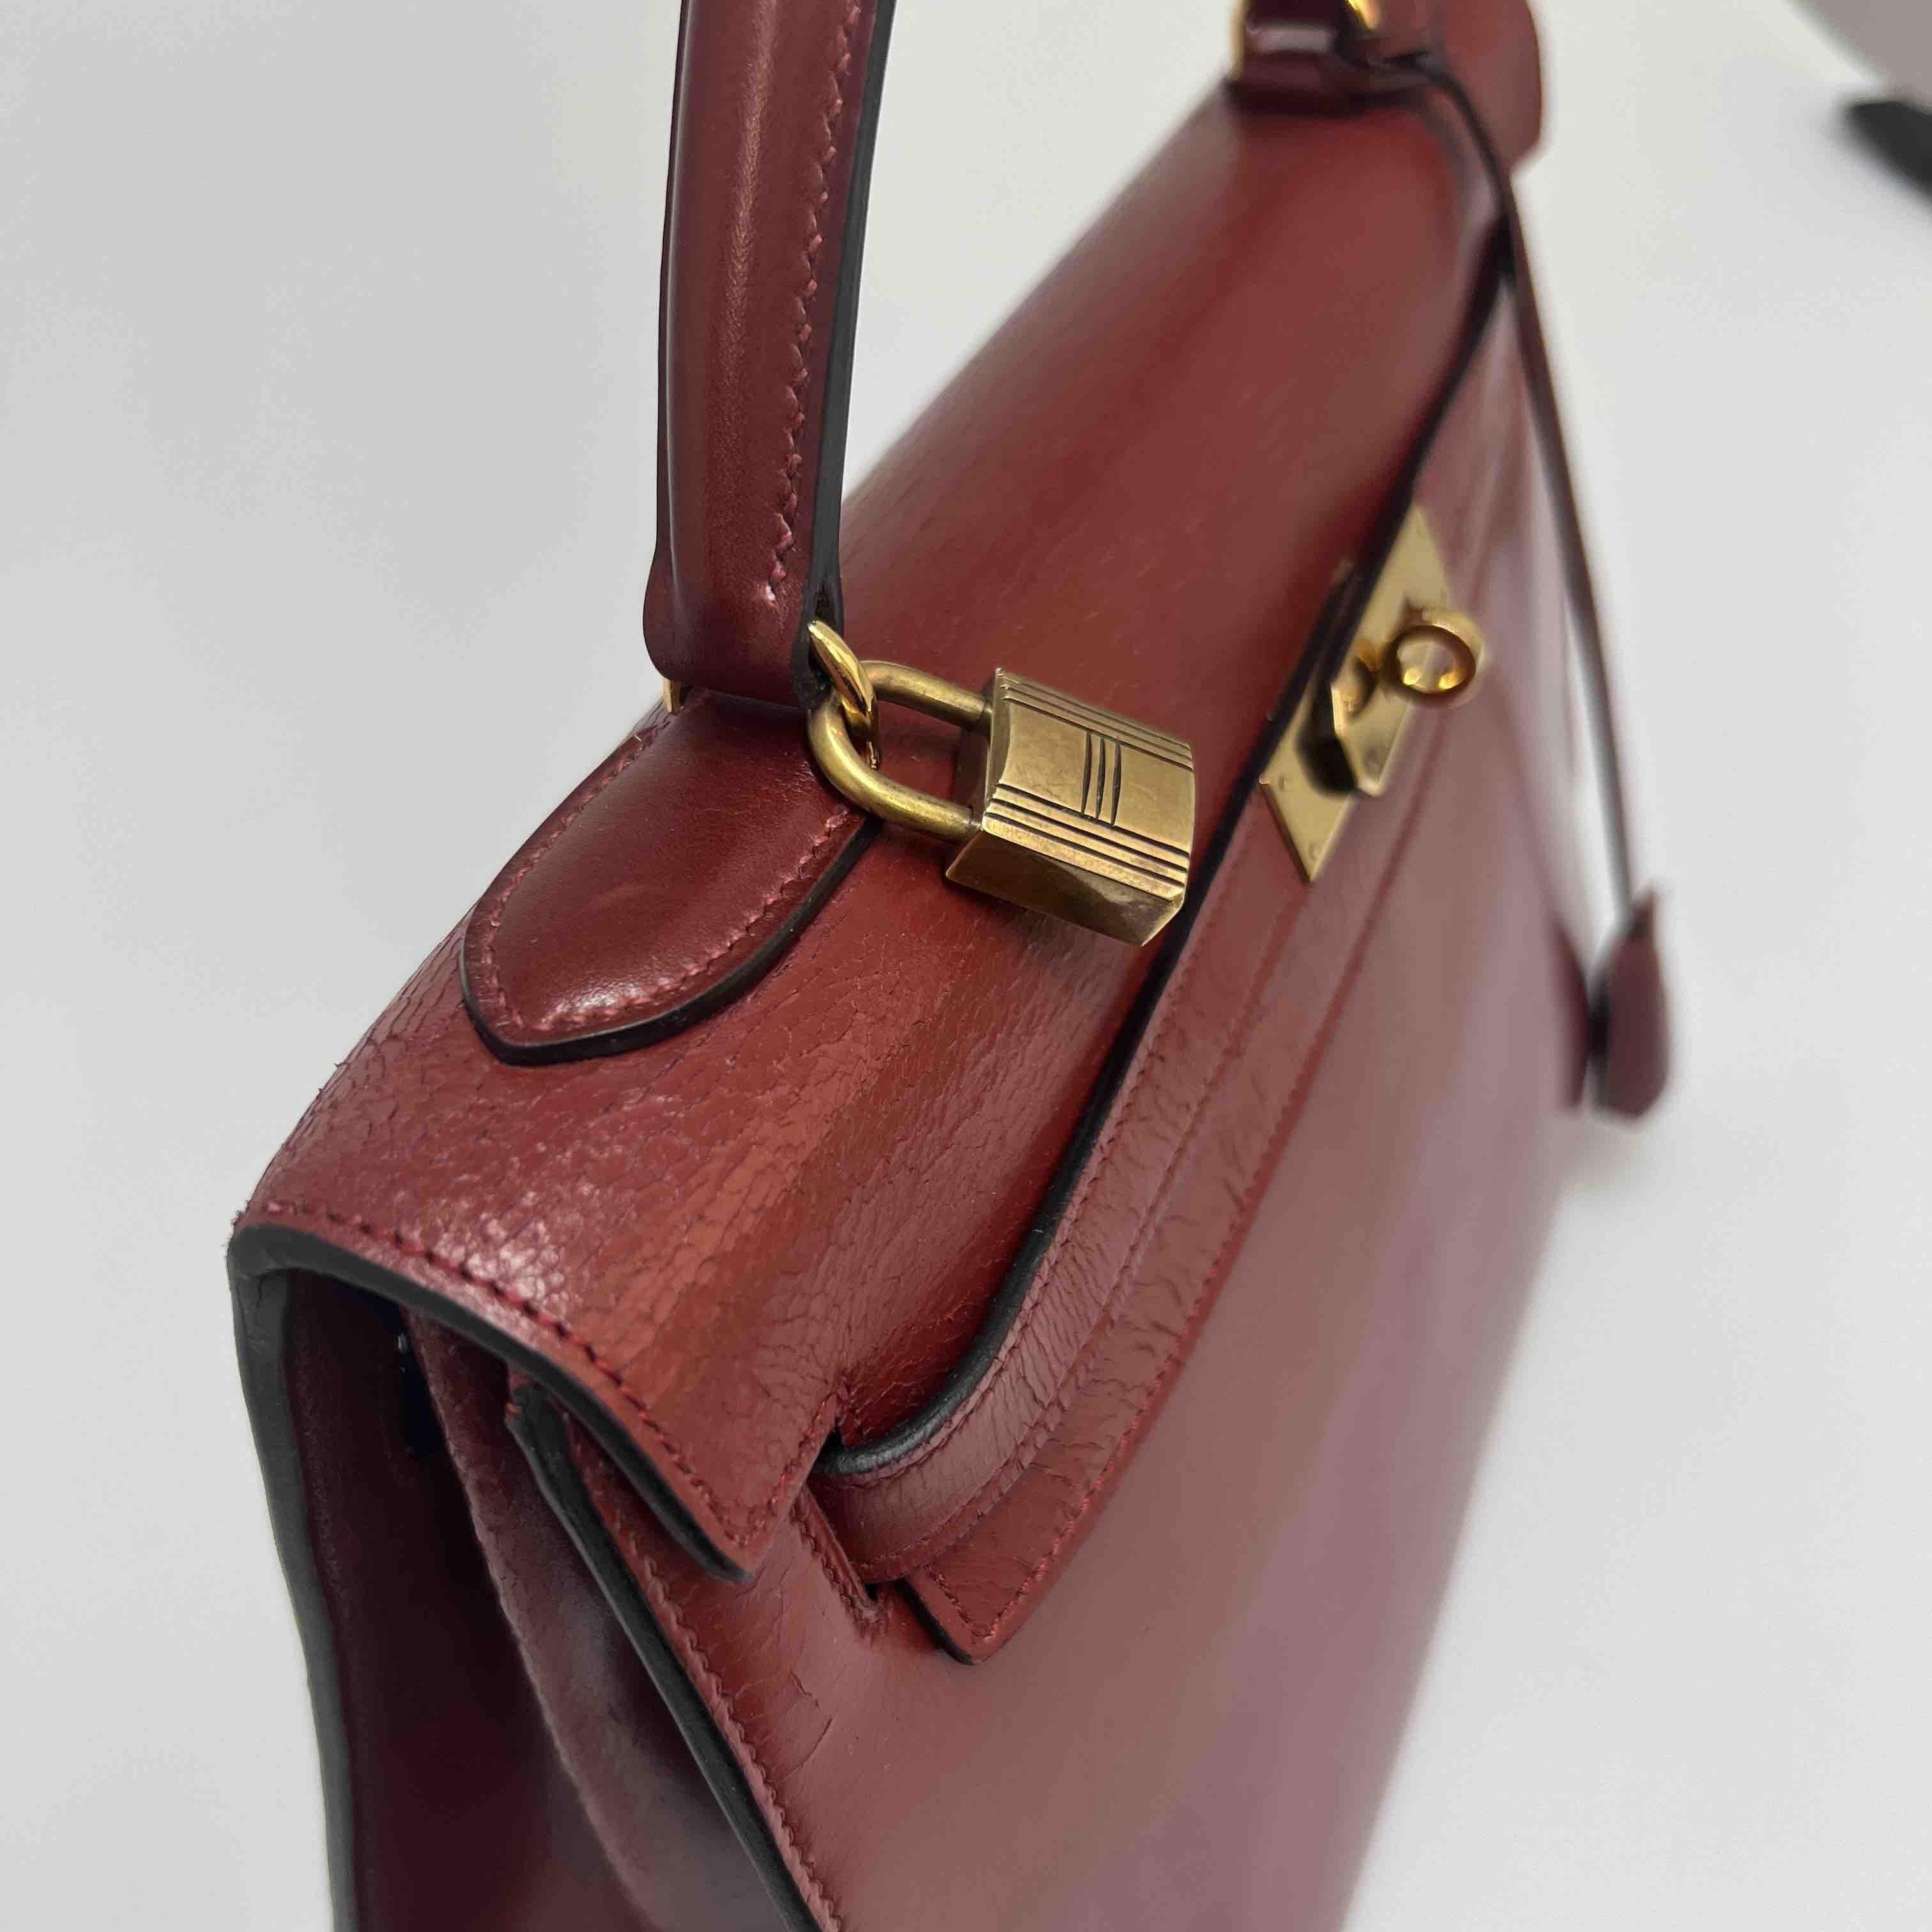 Kelly 32 sellier HERMES in red H box leather. The hardware is in golden metal. Included : Zipper, clochette, keys (2), padlock. Leather shoulder strap changed.
In good condition (cracks on the flap), stains on leather.
Made in France.
Dimensions: 32